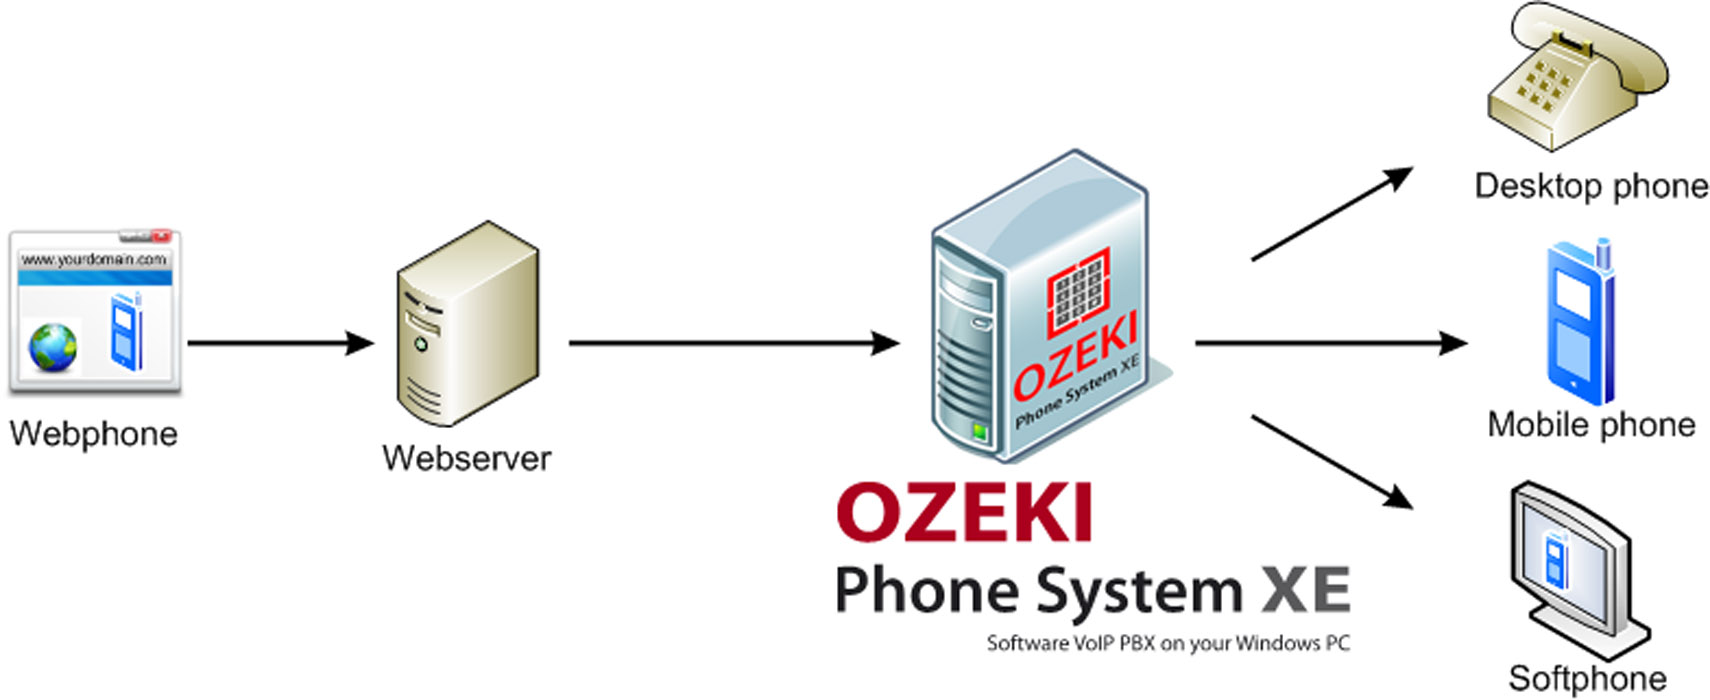 ozekiwebphone server forwards call to appropriate device